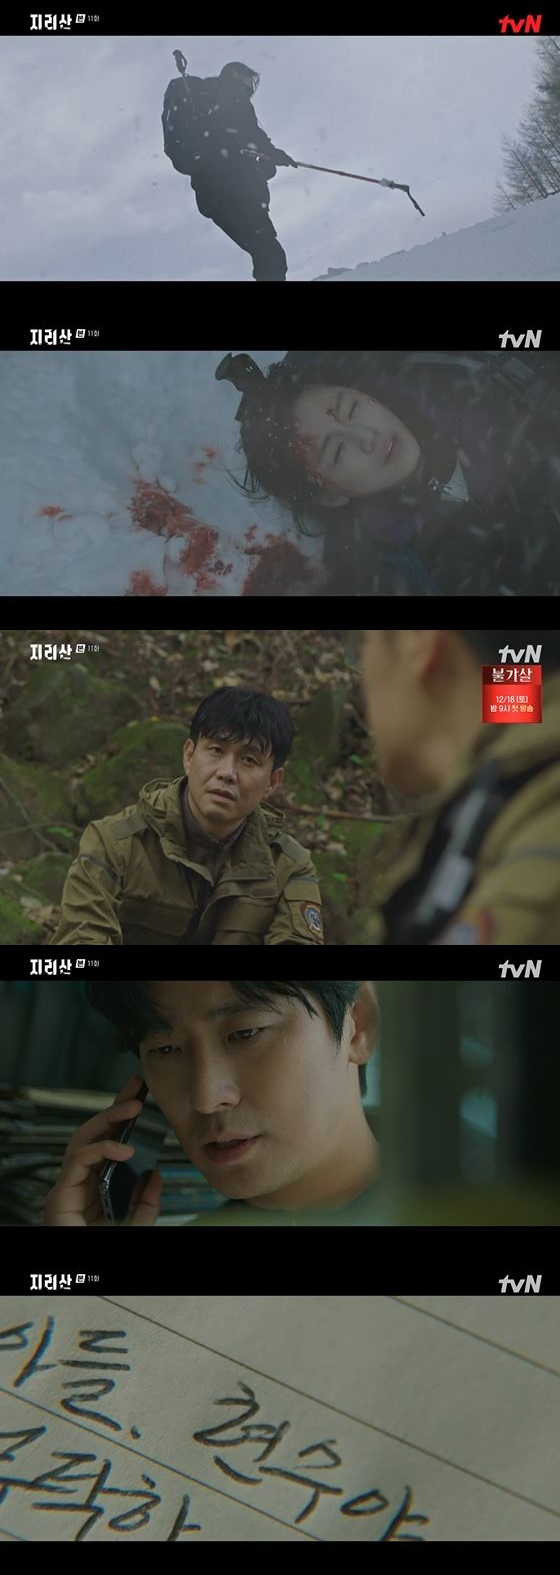 On TVNs Saturday Drama Jirisan, which was broadcast on the afternoon of the 27th, the image of the gang hyun (Ju Ji-hoon), who learned about the connection of the Victims, was broadcast.The Seoi River (Jun Ji-hyun) visited Cho Dae-jin (Seong Dong-il), who was arrested. Seoi River asked, Why did you go on the day of the death of the Dawon (Gongmin-si)?Cho sighed and replied, I do not know what happened to the plural that day. If I brought the pluralist down, I would not be alive yet.The Seoi River asked about the yellow ribbon in Chos bookcase drawer. Cho said, Guideline ribbons that induce distress, poisoned yogurt. You knew.I came back because of that, he said to the Seo River and told Park Il-hae (Jo Han-cheol).Seoigang visited Park Il-hae and was able to hear the truth about Cho Dae-jin with Jeong Gu-young (Oh Jung-se).Someone is disguised as an accident and killing people, and I came back to find out who did it, Seoigang told Jeong Gu-young.Park Il-hae said, The captain was thinking the same thing as Lee Kang.Jingu-young was surprised that someone tried to kill you on purpose, did you talk to the police? And Seo River said, I did not believe it because there was no direct evidence or sighting.But there was definitely that person, he was convinced.The Seoi River asked for help from Jingu-young, saying, If you go to the black bridge, there will be evidence. But this was the plan of the Seoi River, which suspected Jingu-young as a criminal.The Seoi River met Park Il-hae in advance and said, The old man was in the mountain on the day the tea garden disappeared.If you have decisive evidence, you will try to kill me. Meanwhile, in 2019, while studying flood data from Jirisan, gang hyun discovered that the father of the deceased Sergeant Kim Suspension was Kim Nam-sik, who had died in a flood accident.Victims were all involved in the flood accident in 1995, said gang hyun.